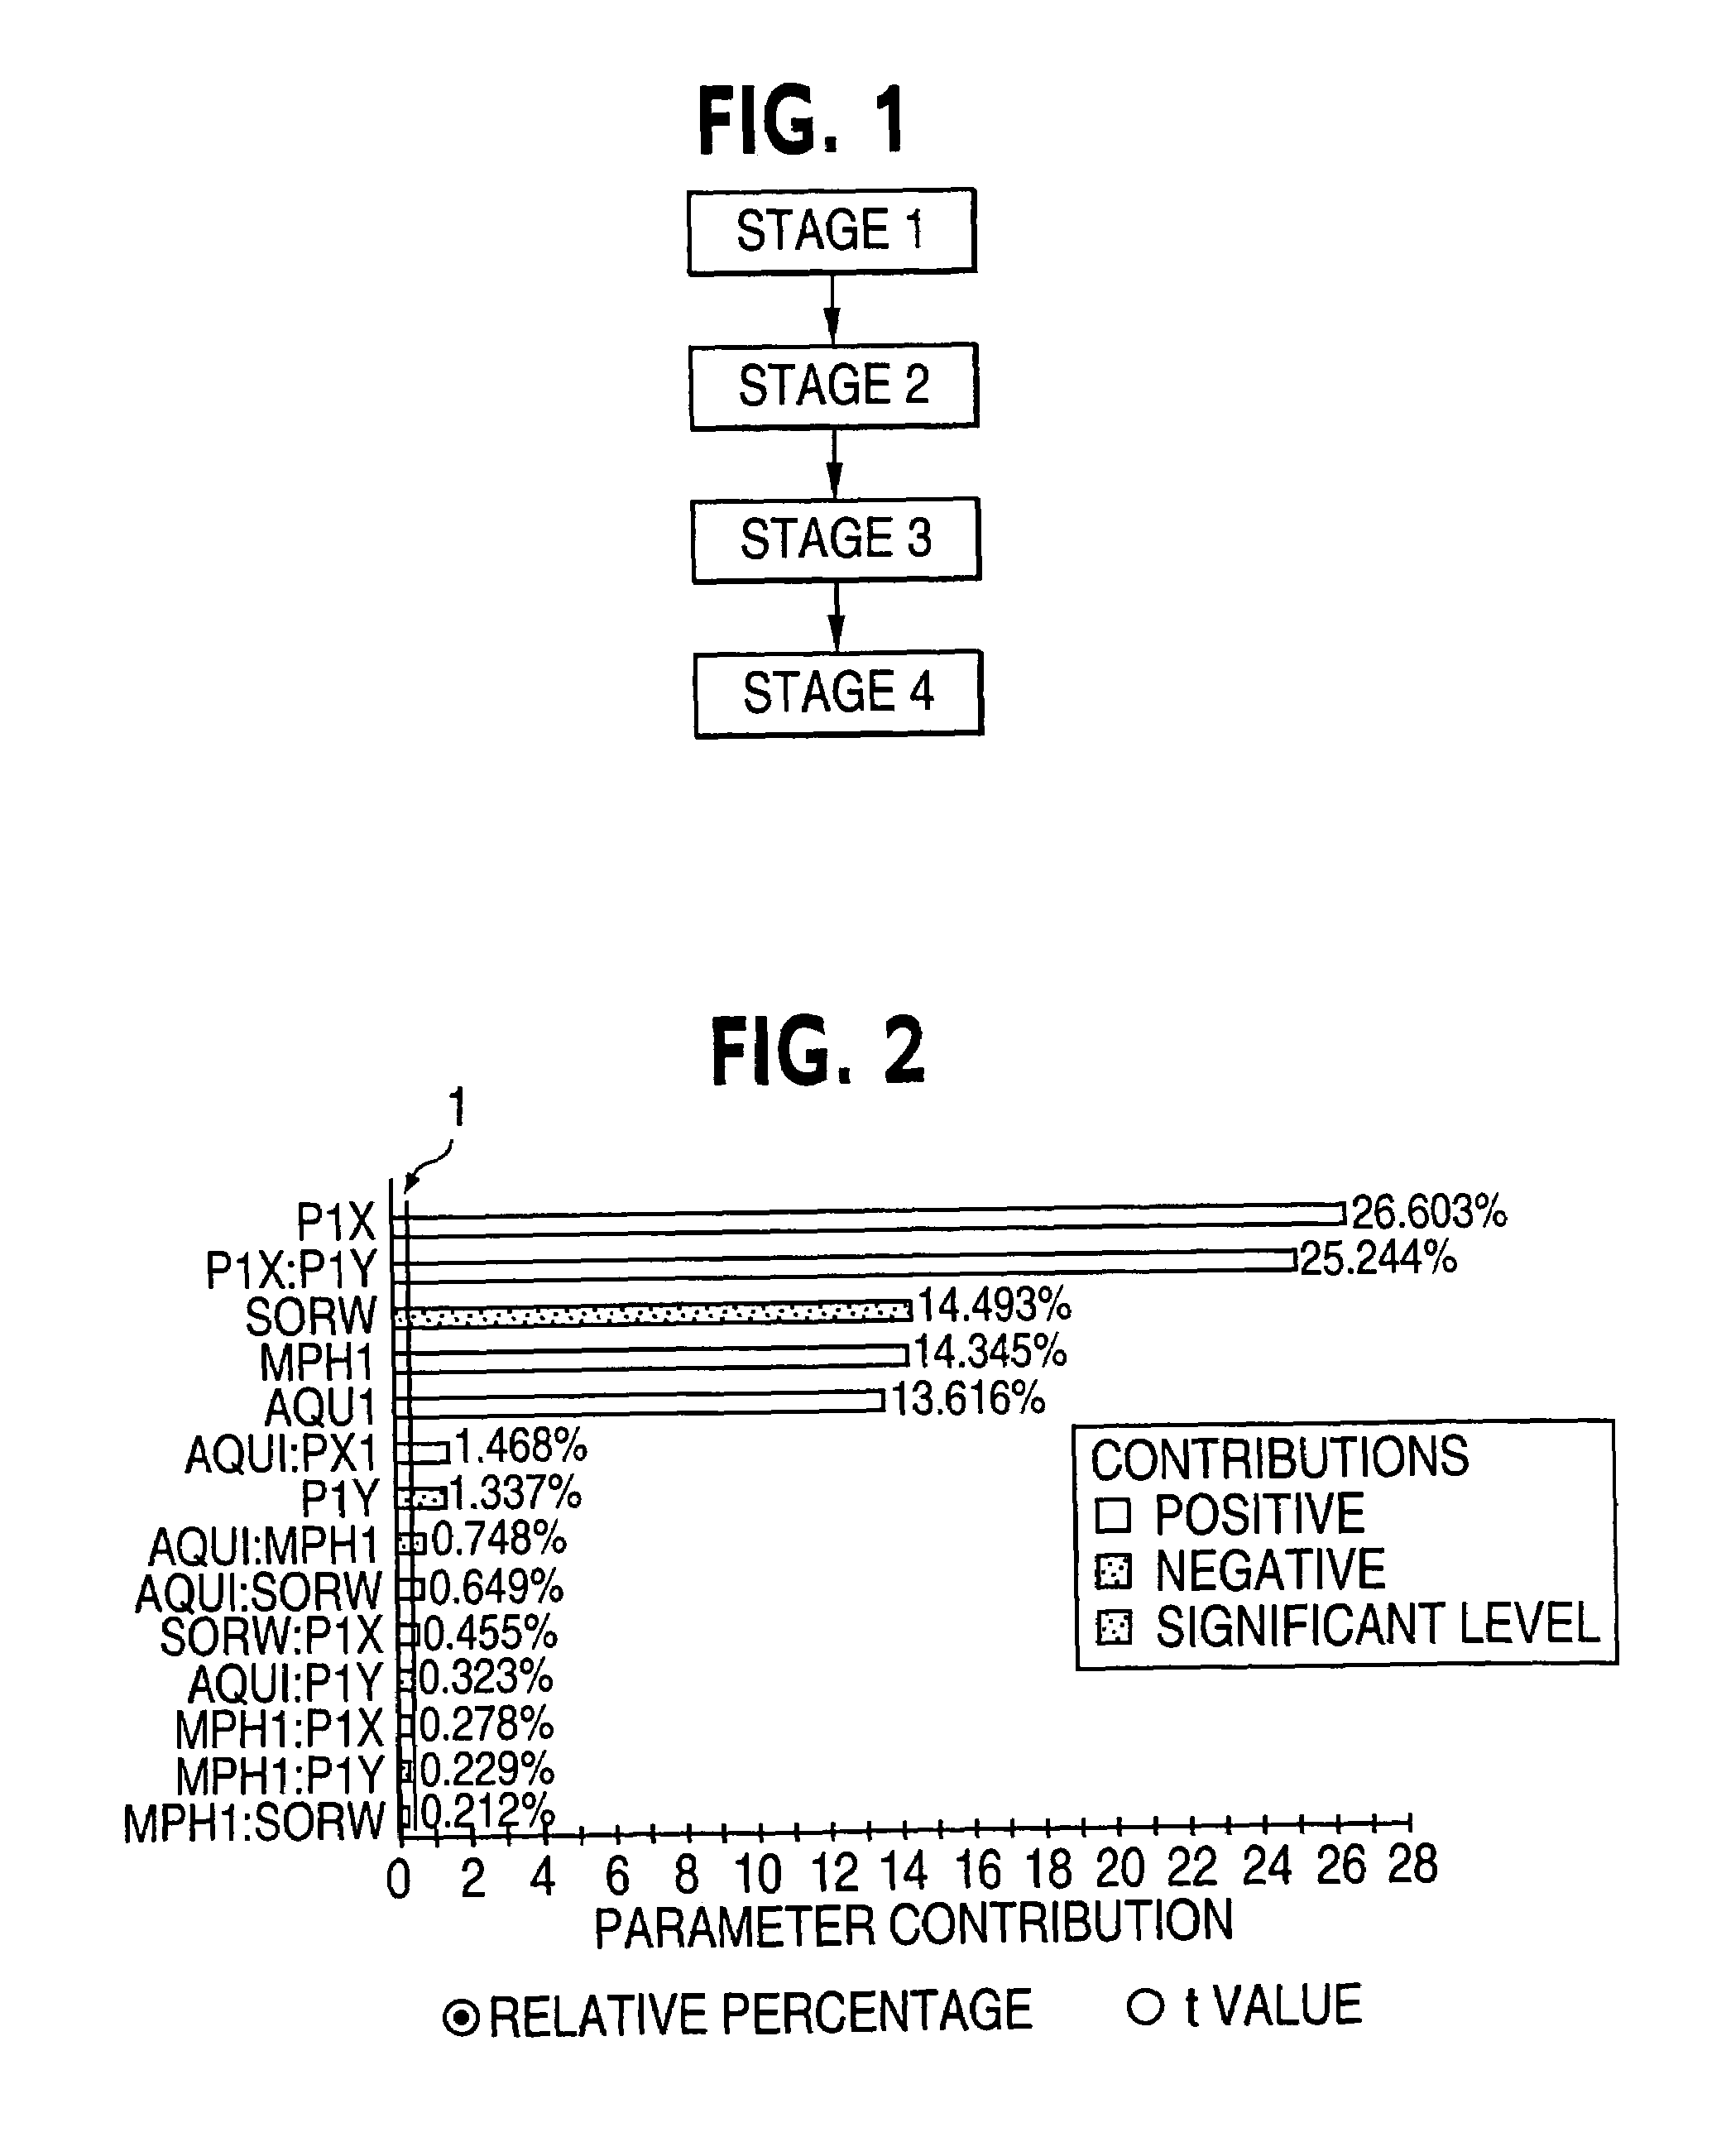 Method for optimizing production of an oil reservoir in the presence of uncertainties